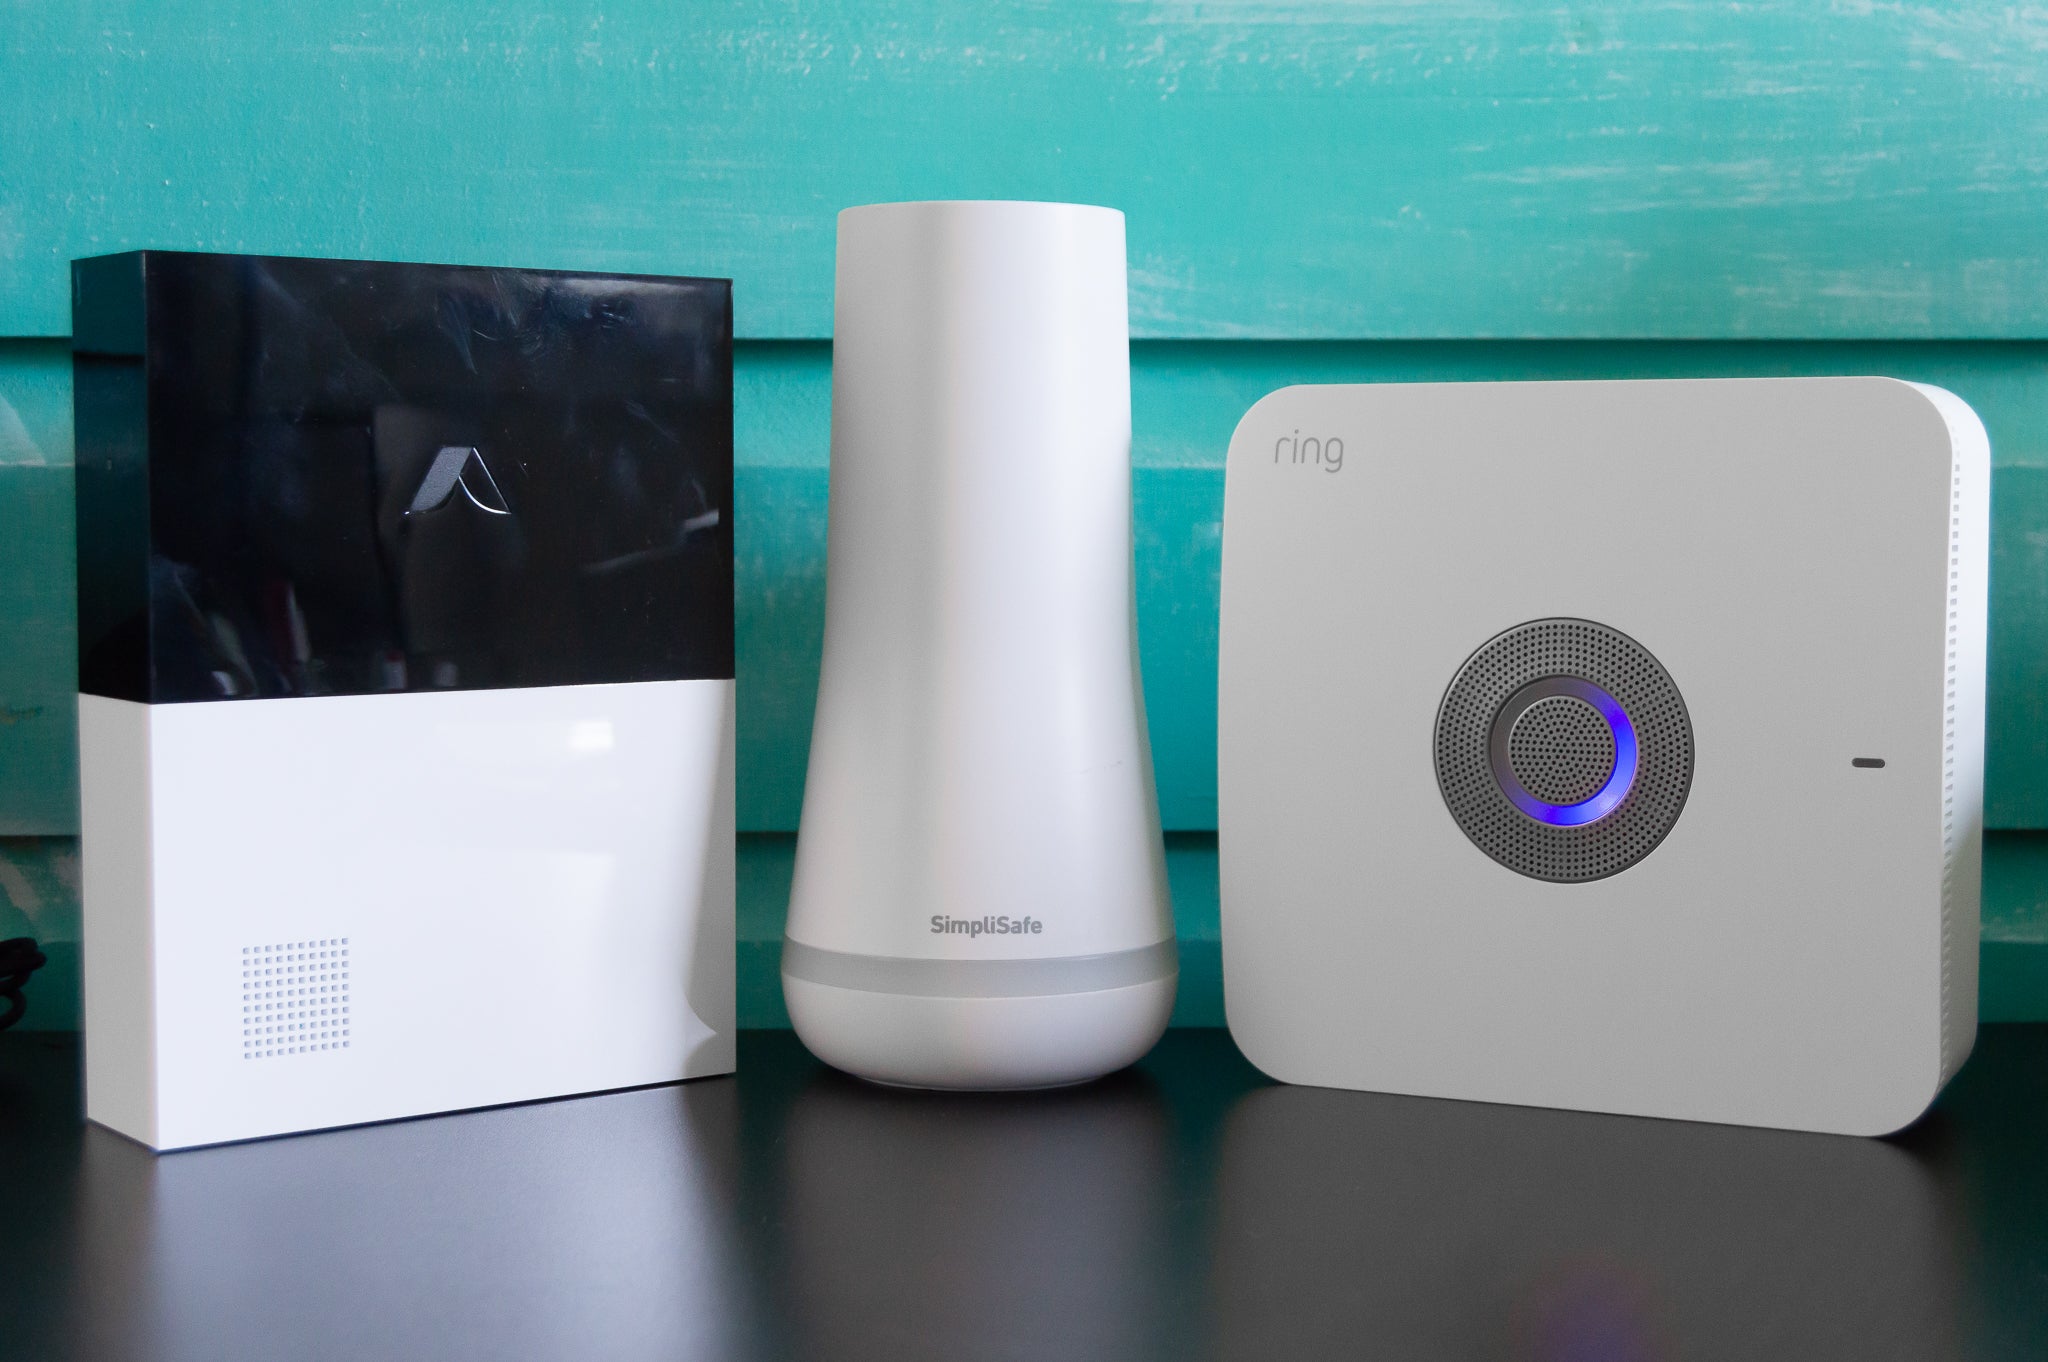 Review: Best Home Security System for Ultimate Protection